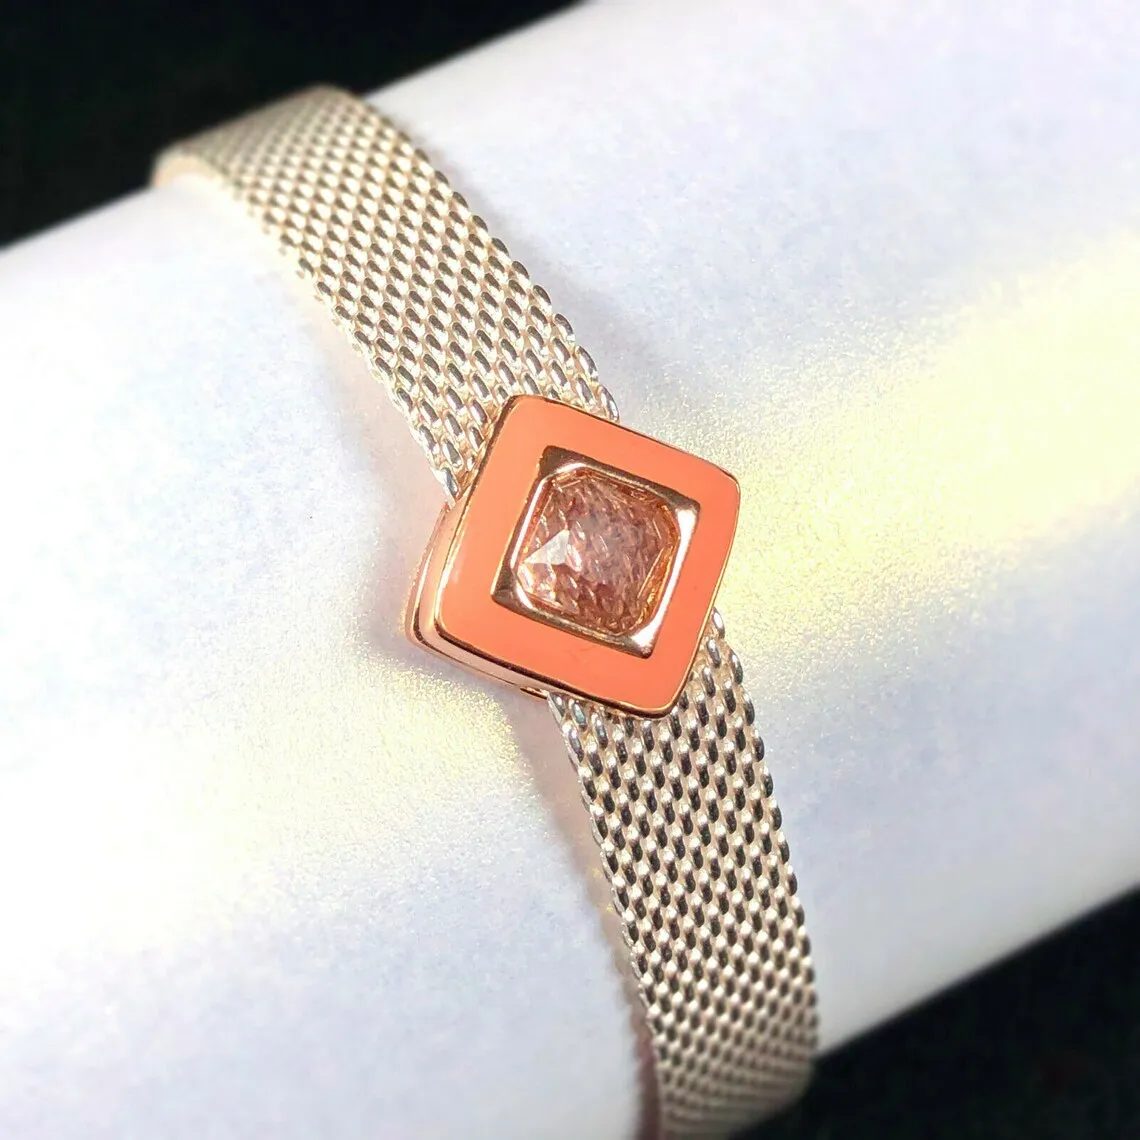 

925 Sterling Silver Rose Gold Reflexions Pink Enamel Square Clip Charm Bead Fits European Pandora Reflexions Bracelets Only